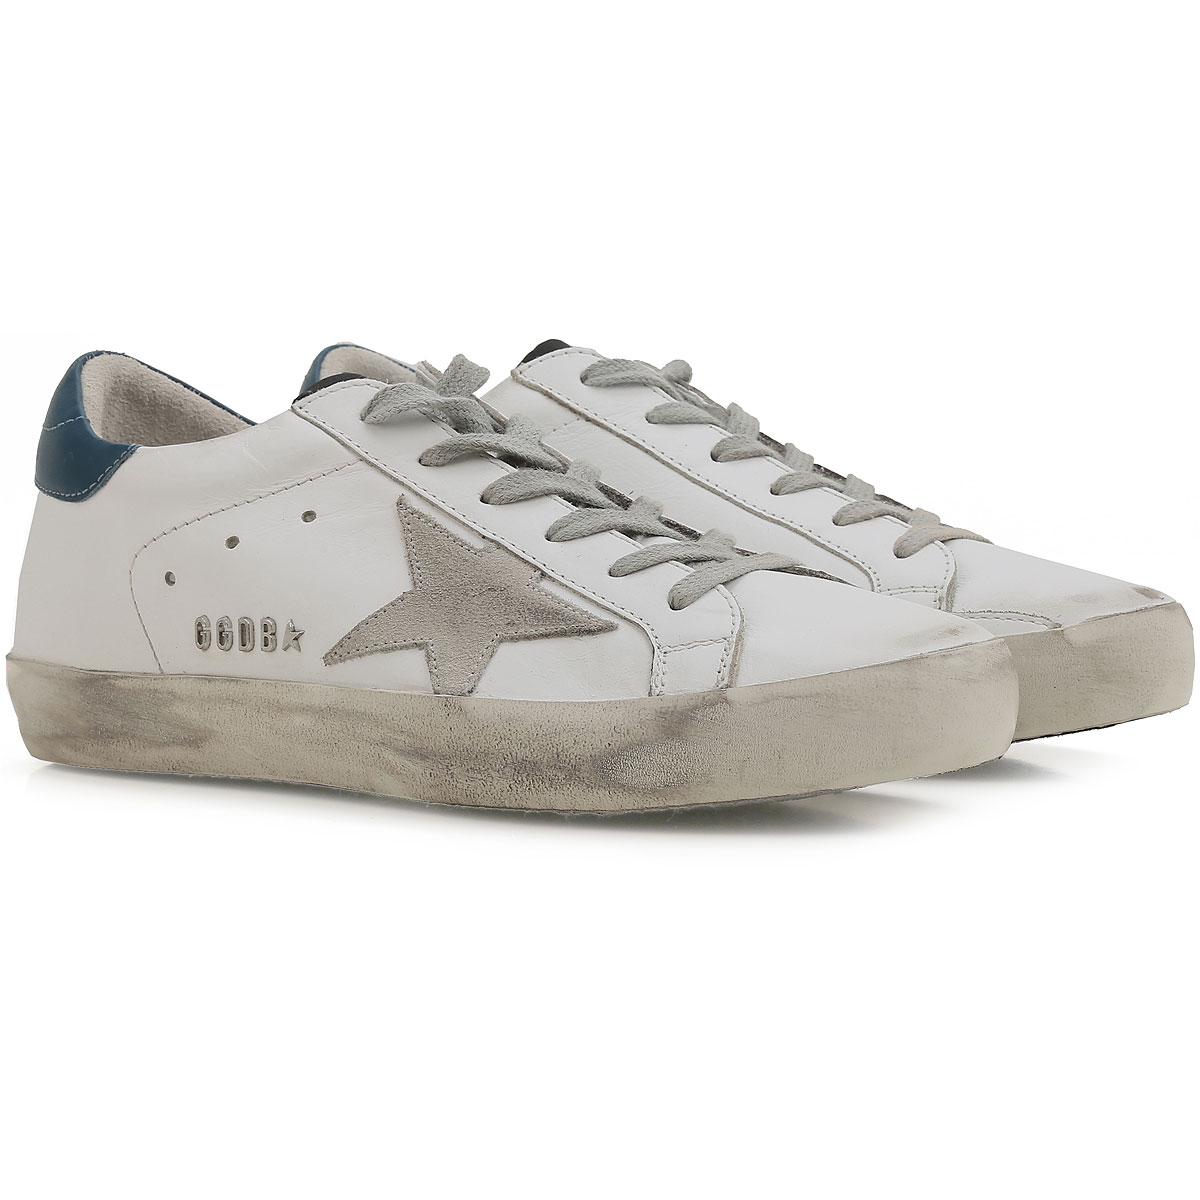 Womens Shoes Golden Goose, Style code: g31ws590-c71-